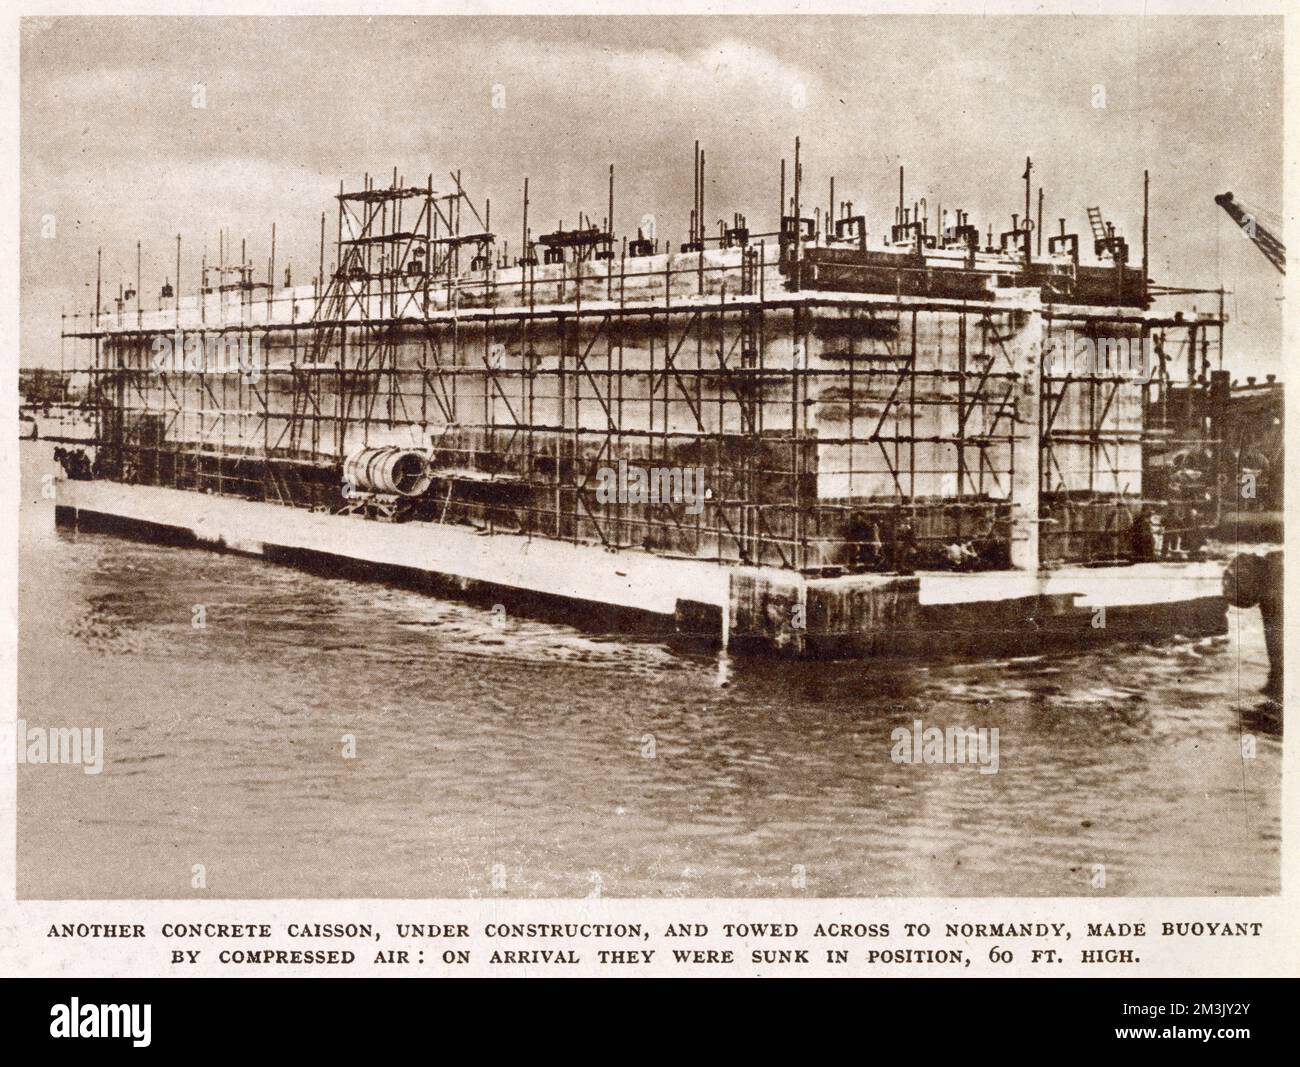 A steel and concrete 'Mulberry' caisson under construction on the South Coast of Britain during 1944.   When the Allied Armies invaded Normandy in June 1944, they required the use of a port to unload supplies quickly. The Allied commanders decided to take a pre-fabricated port, made of caissons such as the one pictured, and build it at Arromanches Beach. Stock Photo